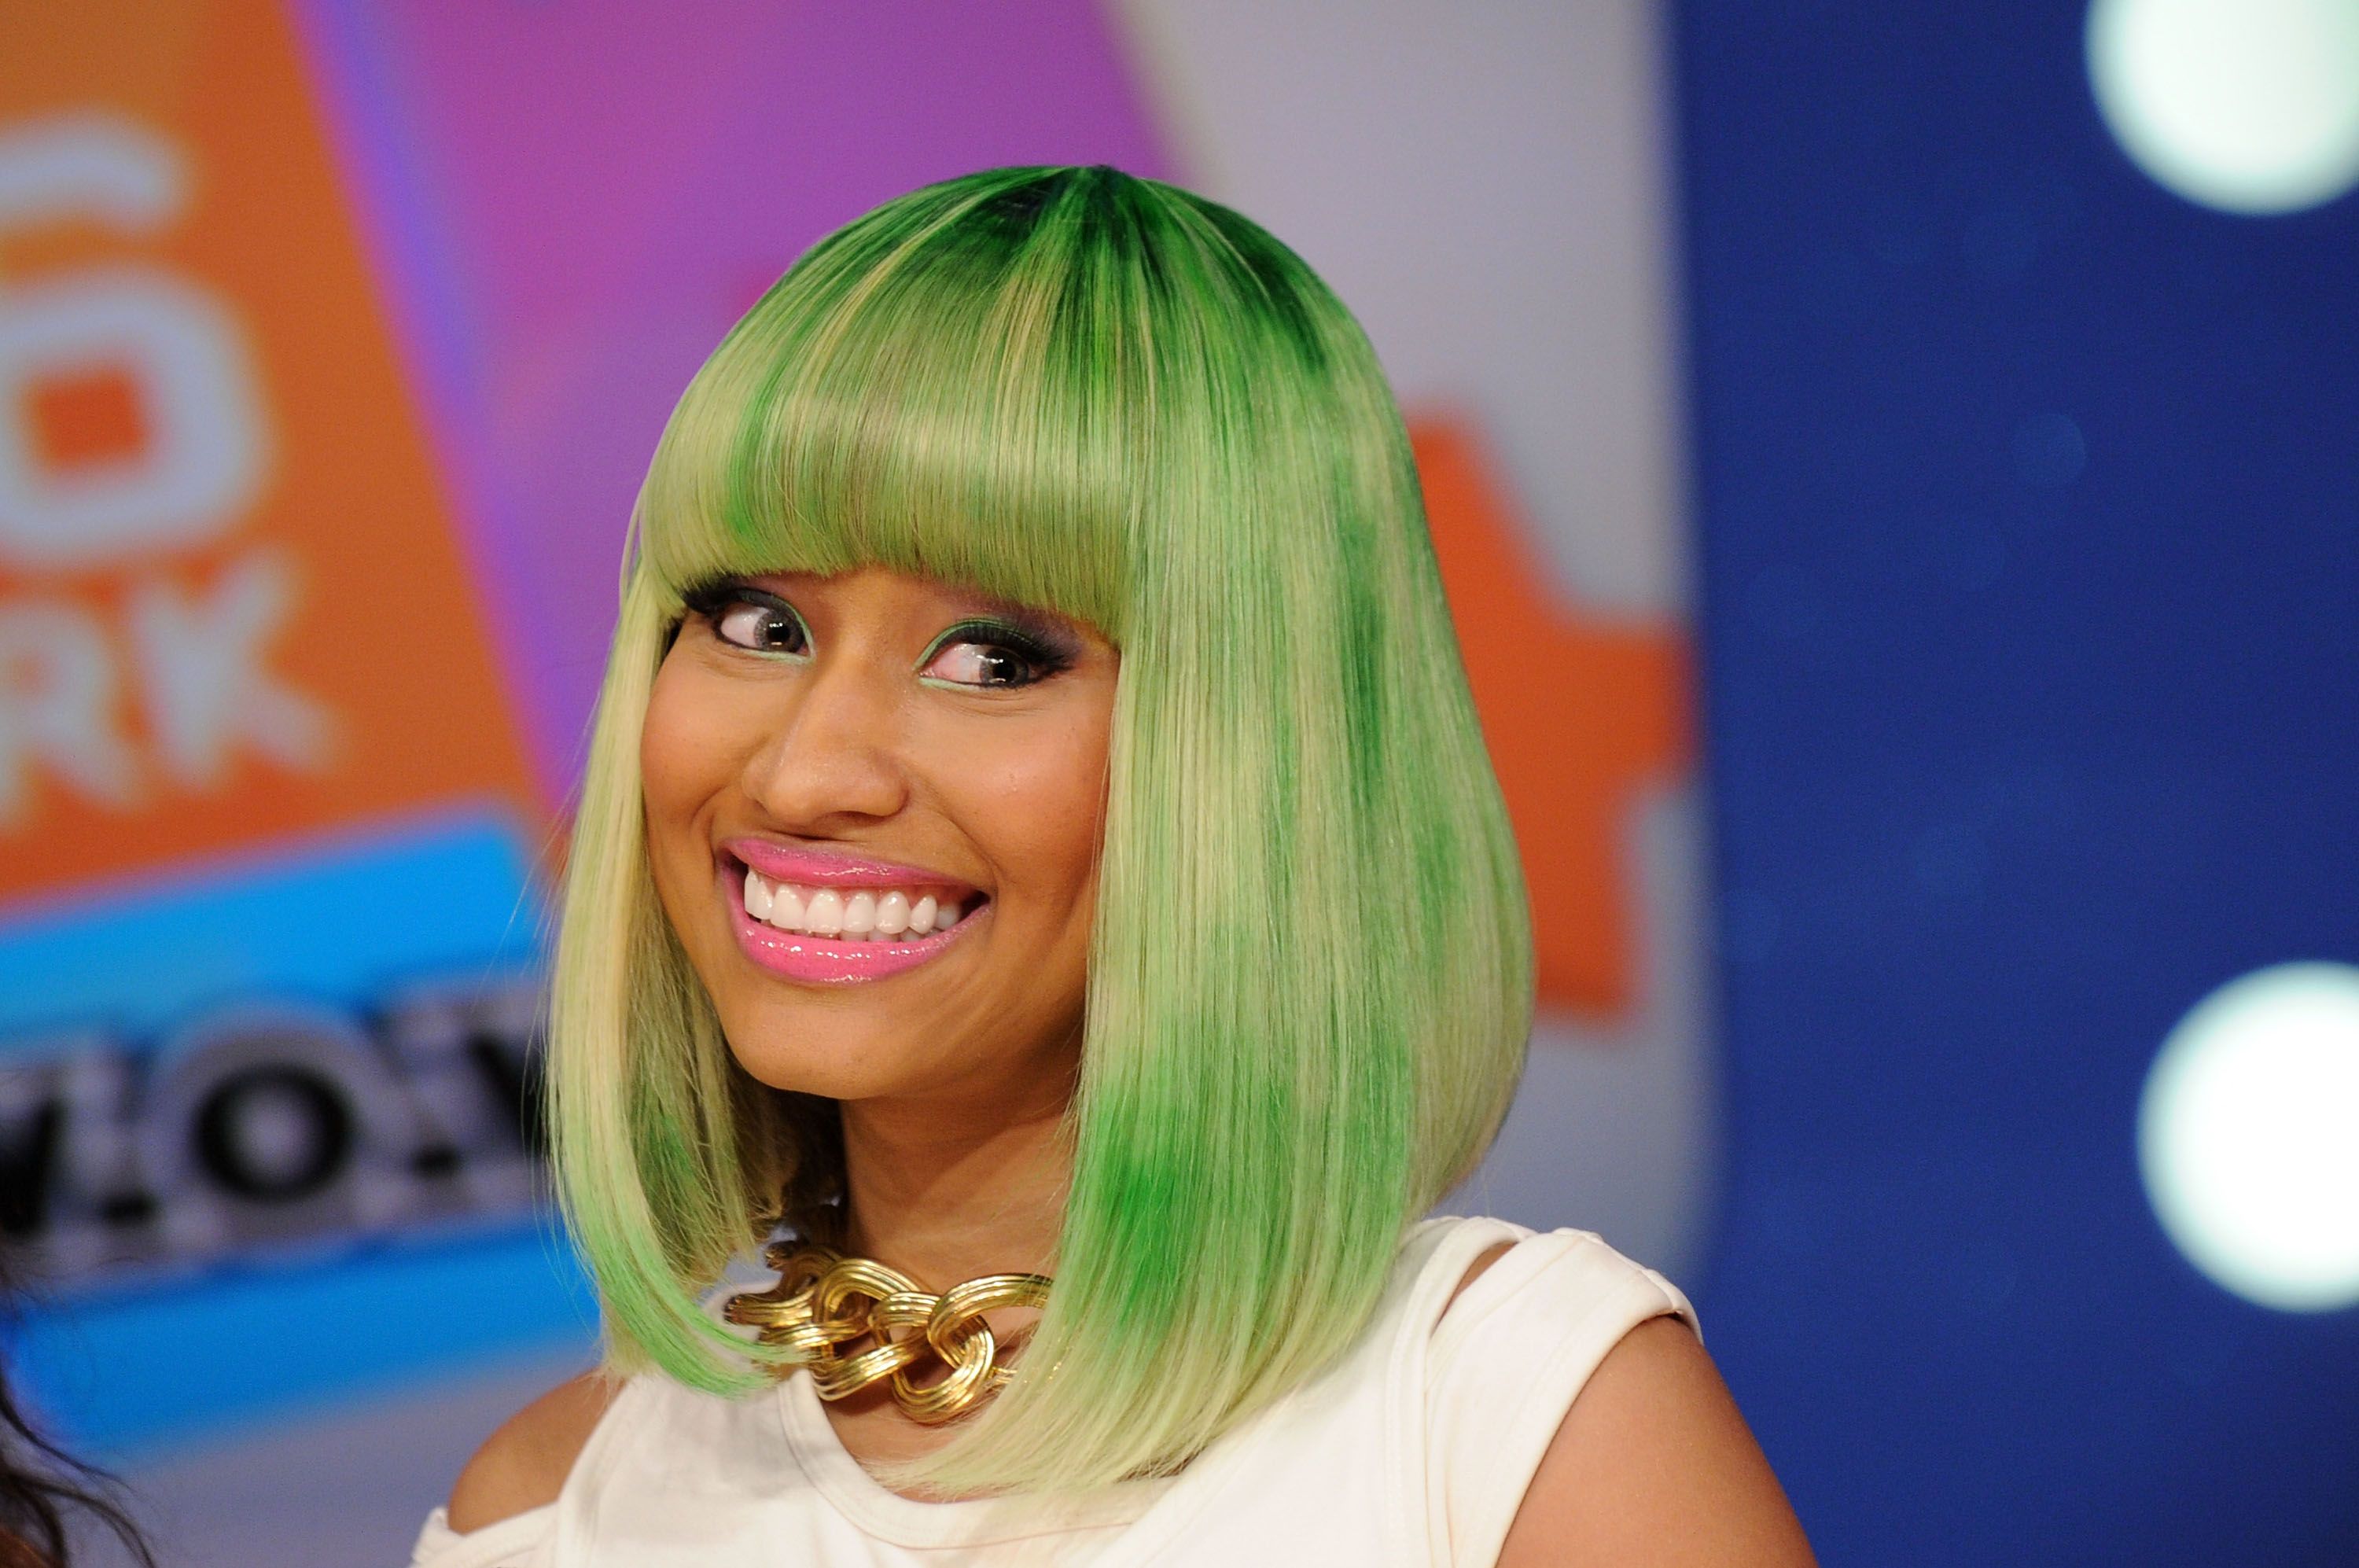 Nicki Minaj during BET's 106 & Park at BET Studios on March 31, 2010 in New York City. | Source: Getty Images